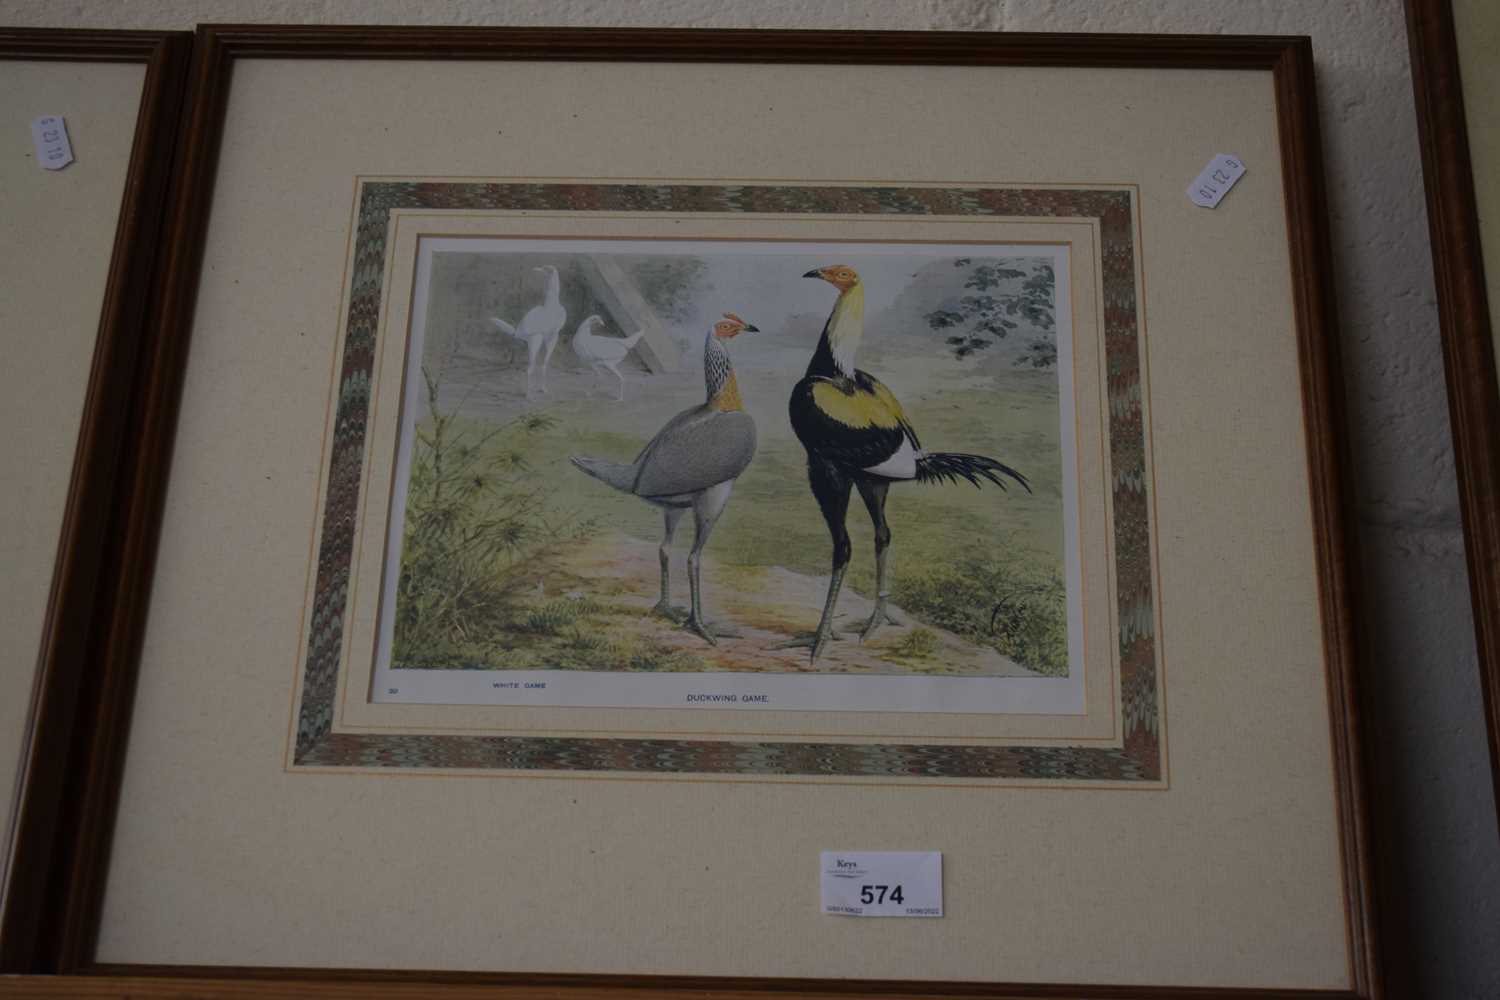 AFTER LUDLOW, THREE COLOURED PRINTS, VARIOUS POULTRY BREEDS - Image 2 of 3